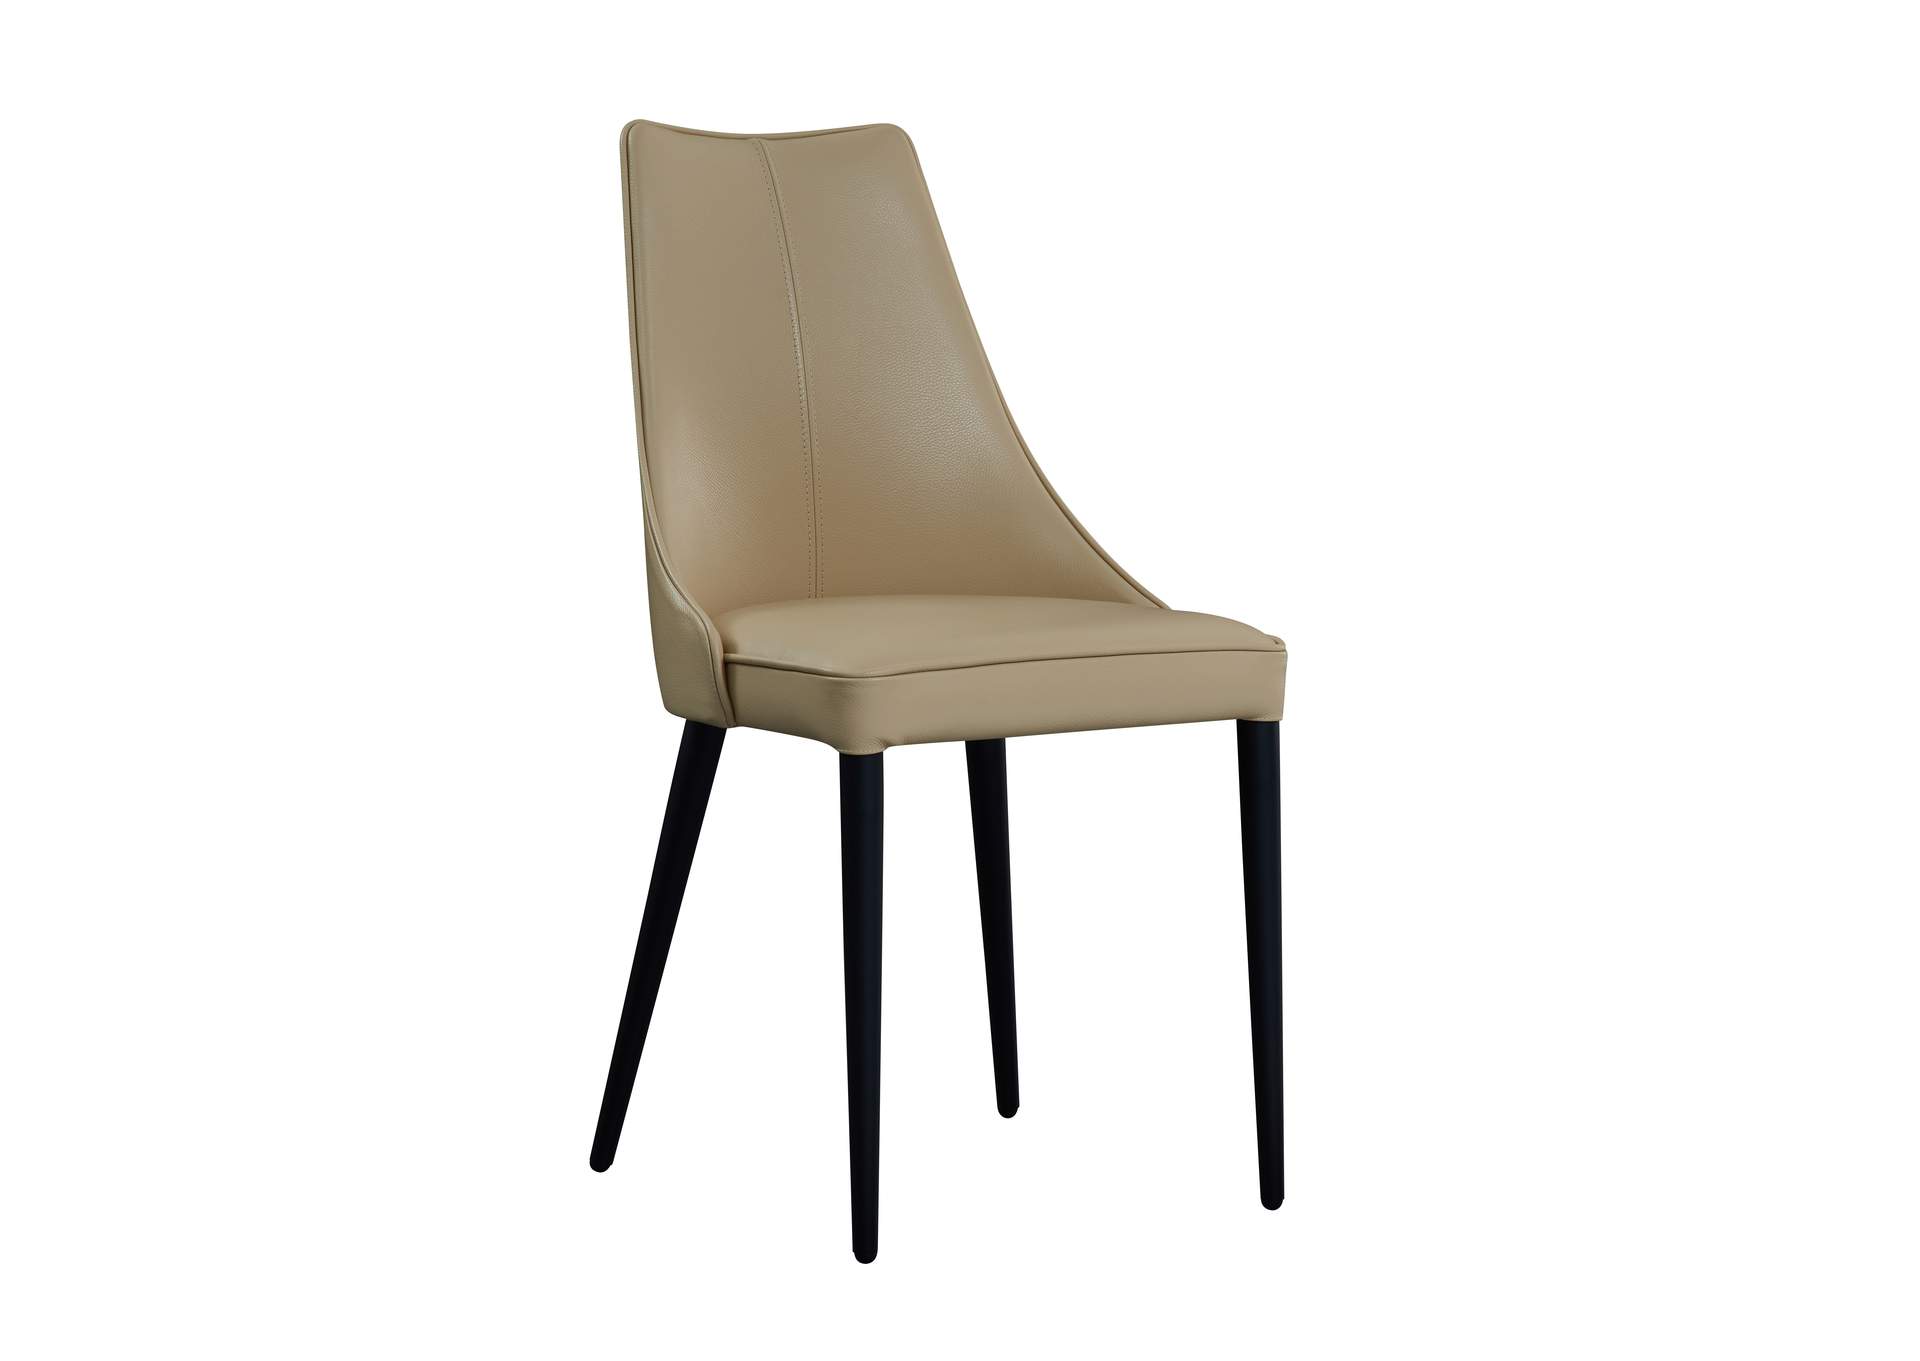 Milano Leather Dining Chair In Tan,J&M Furniture